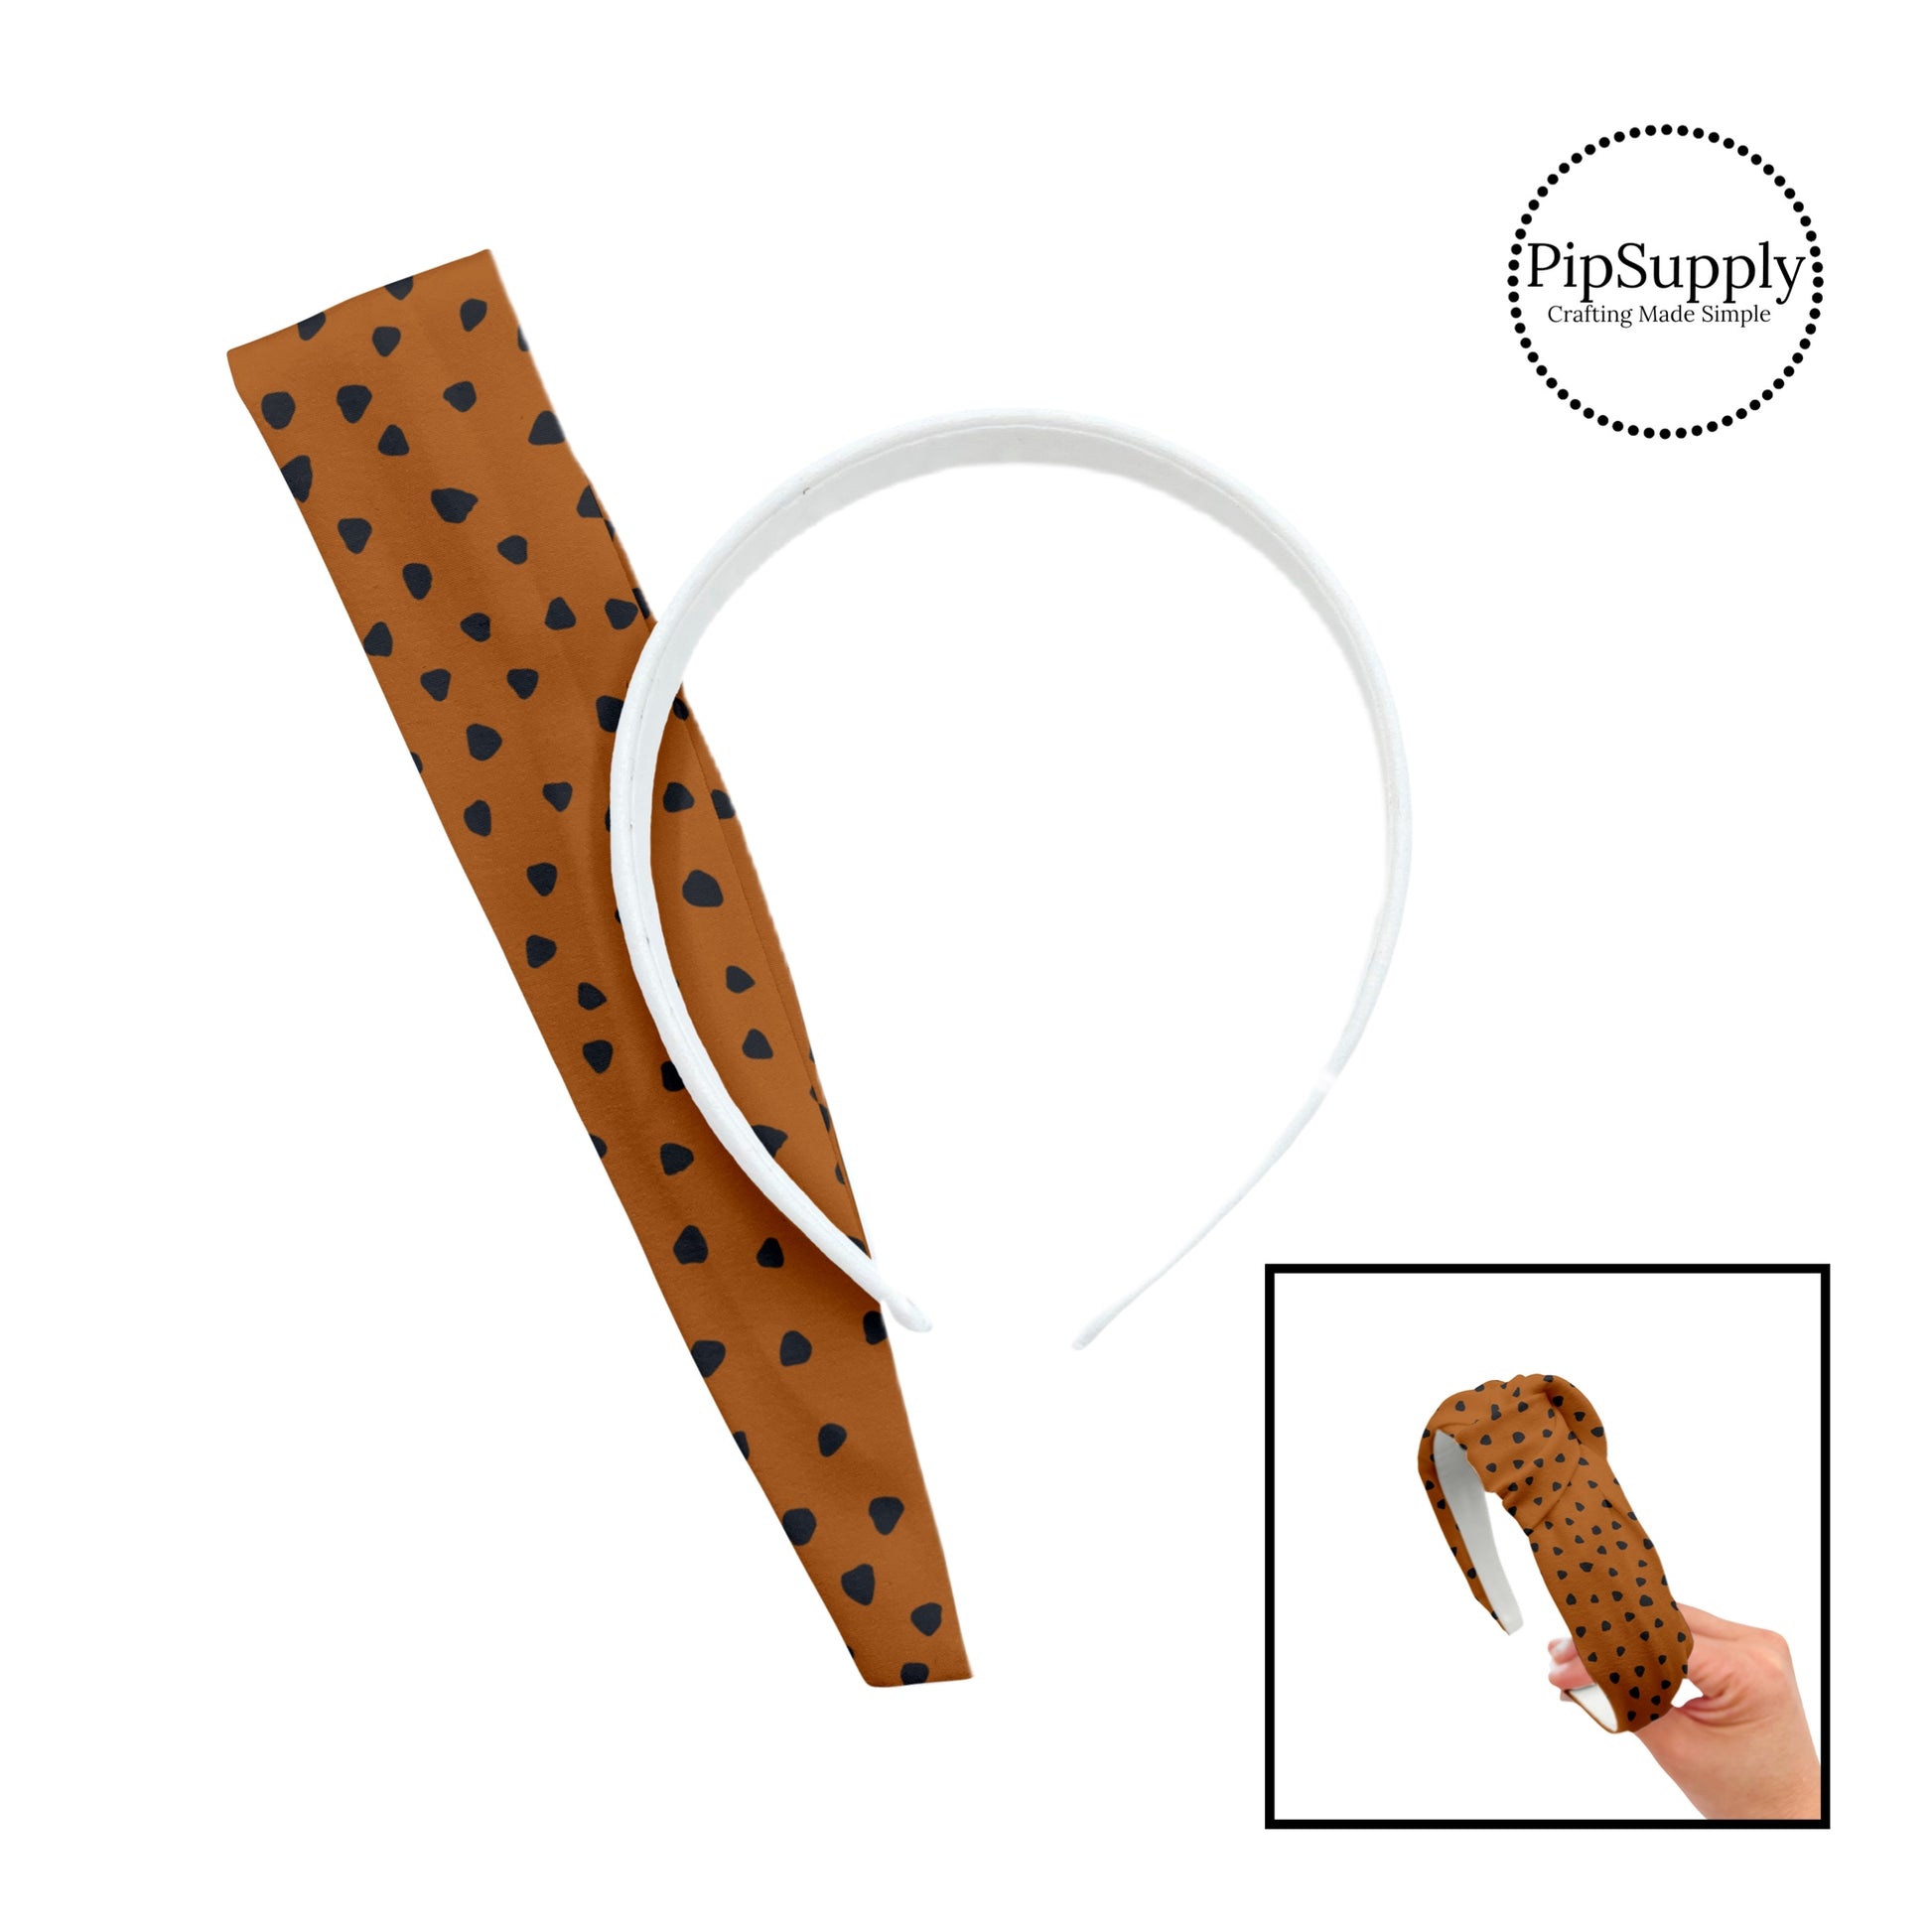 These speckled themed headband kits are easy to assemble and come with everything you need to make your own knotted headband. These kits include a custom printed and sewn fabric strip and a coordinating velvet or ribbed headband. The headband kits features small black speckled dots on brown.